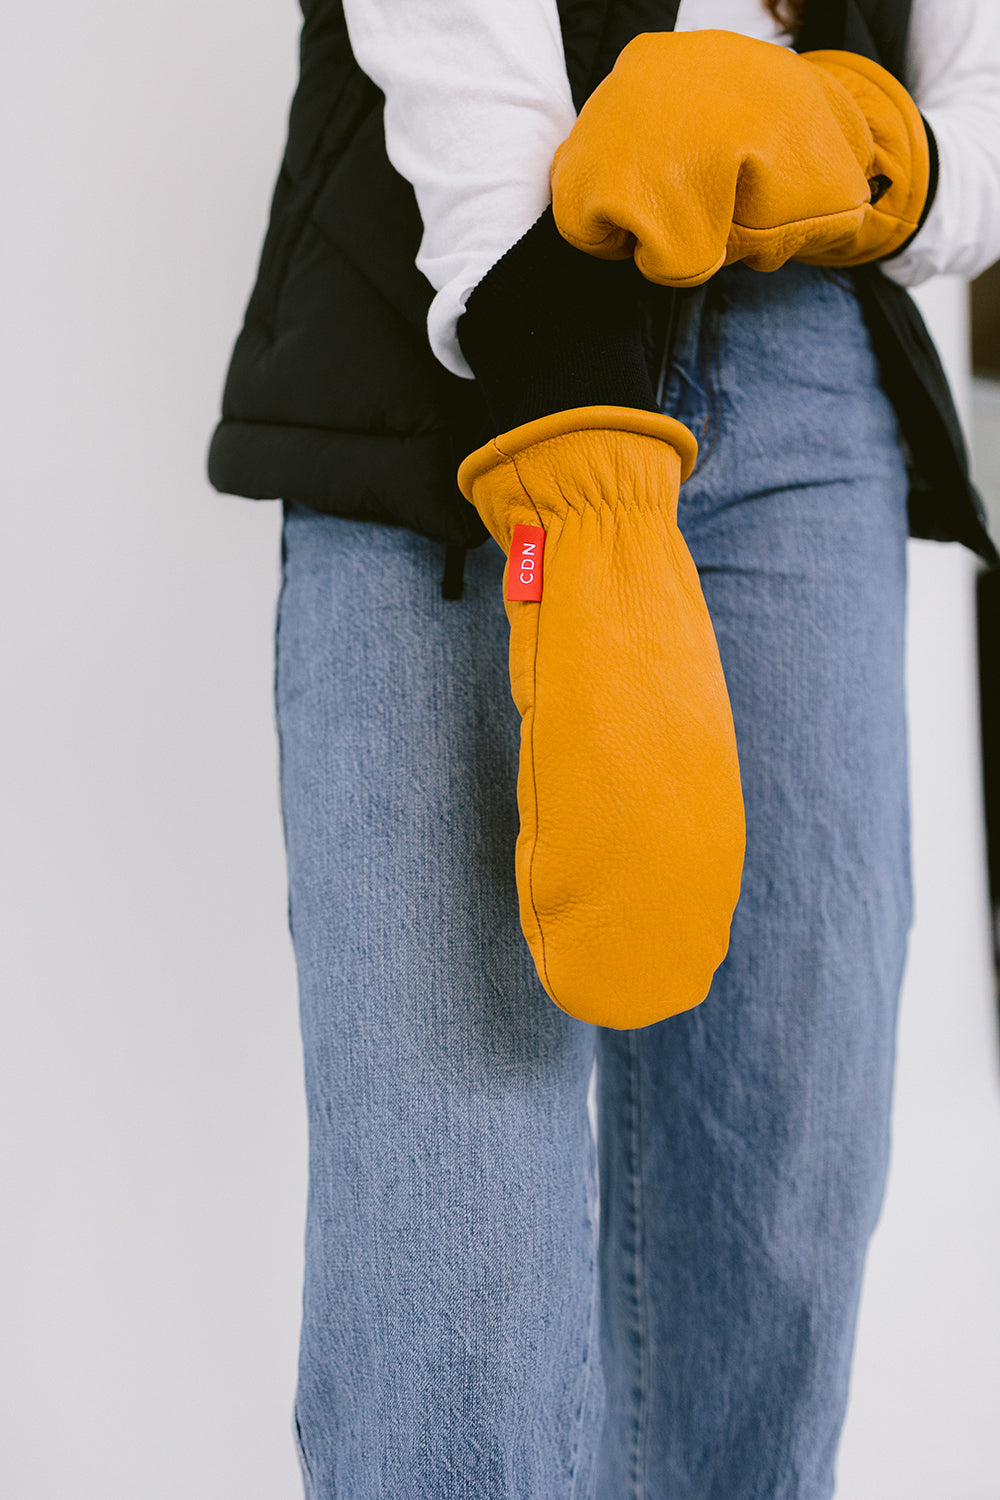 CDN x Watson Gloves Leather Winter Mitts - Local Laundry